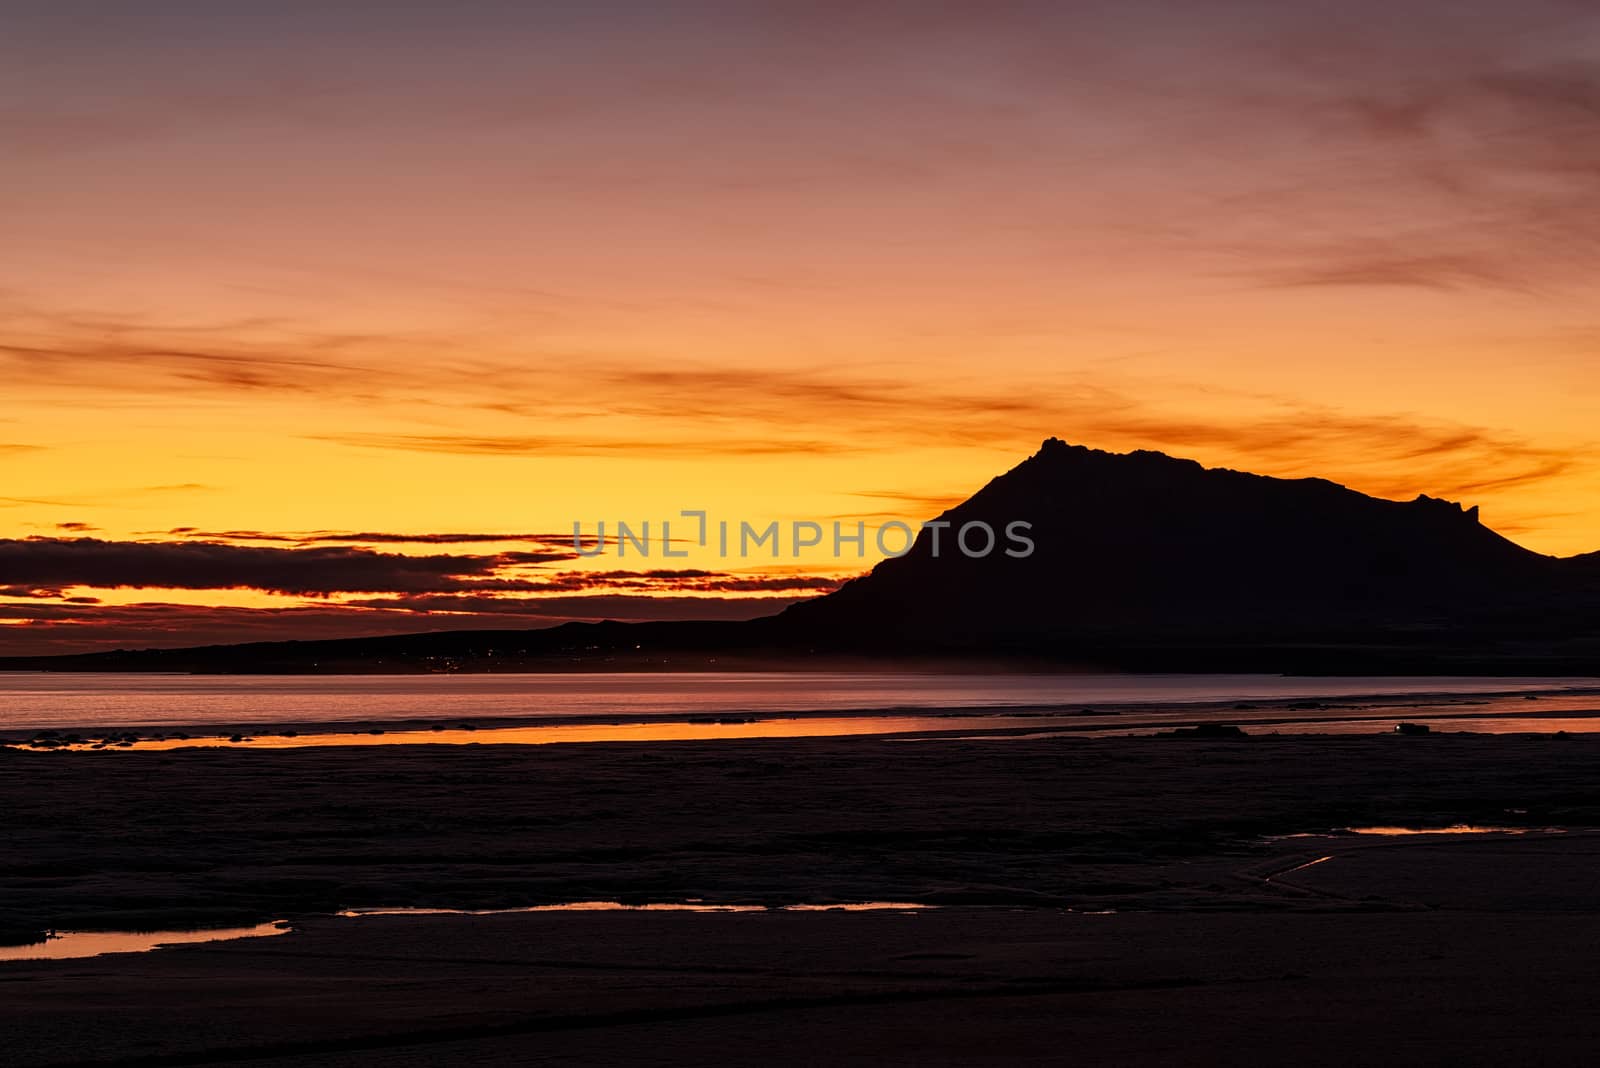 Mountains in Snaefellsnes peninsula at sunset, Iceland